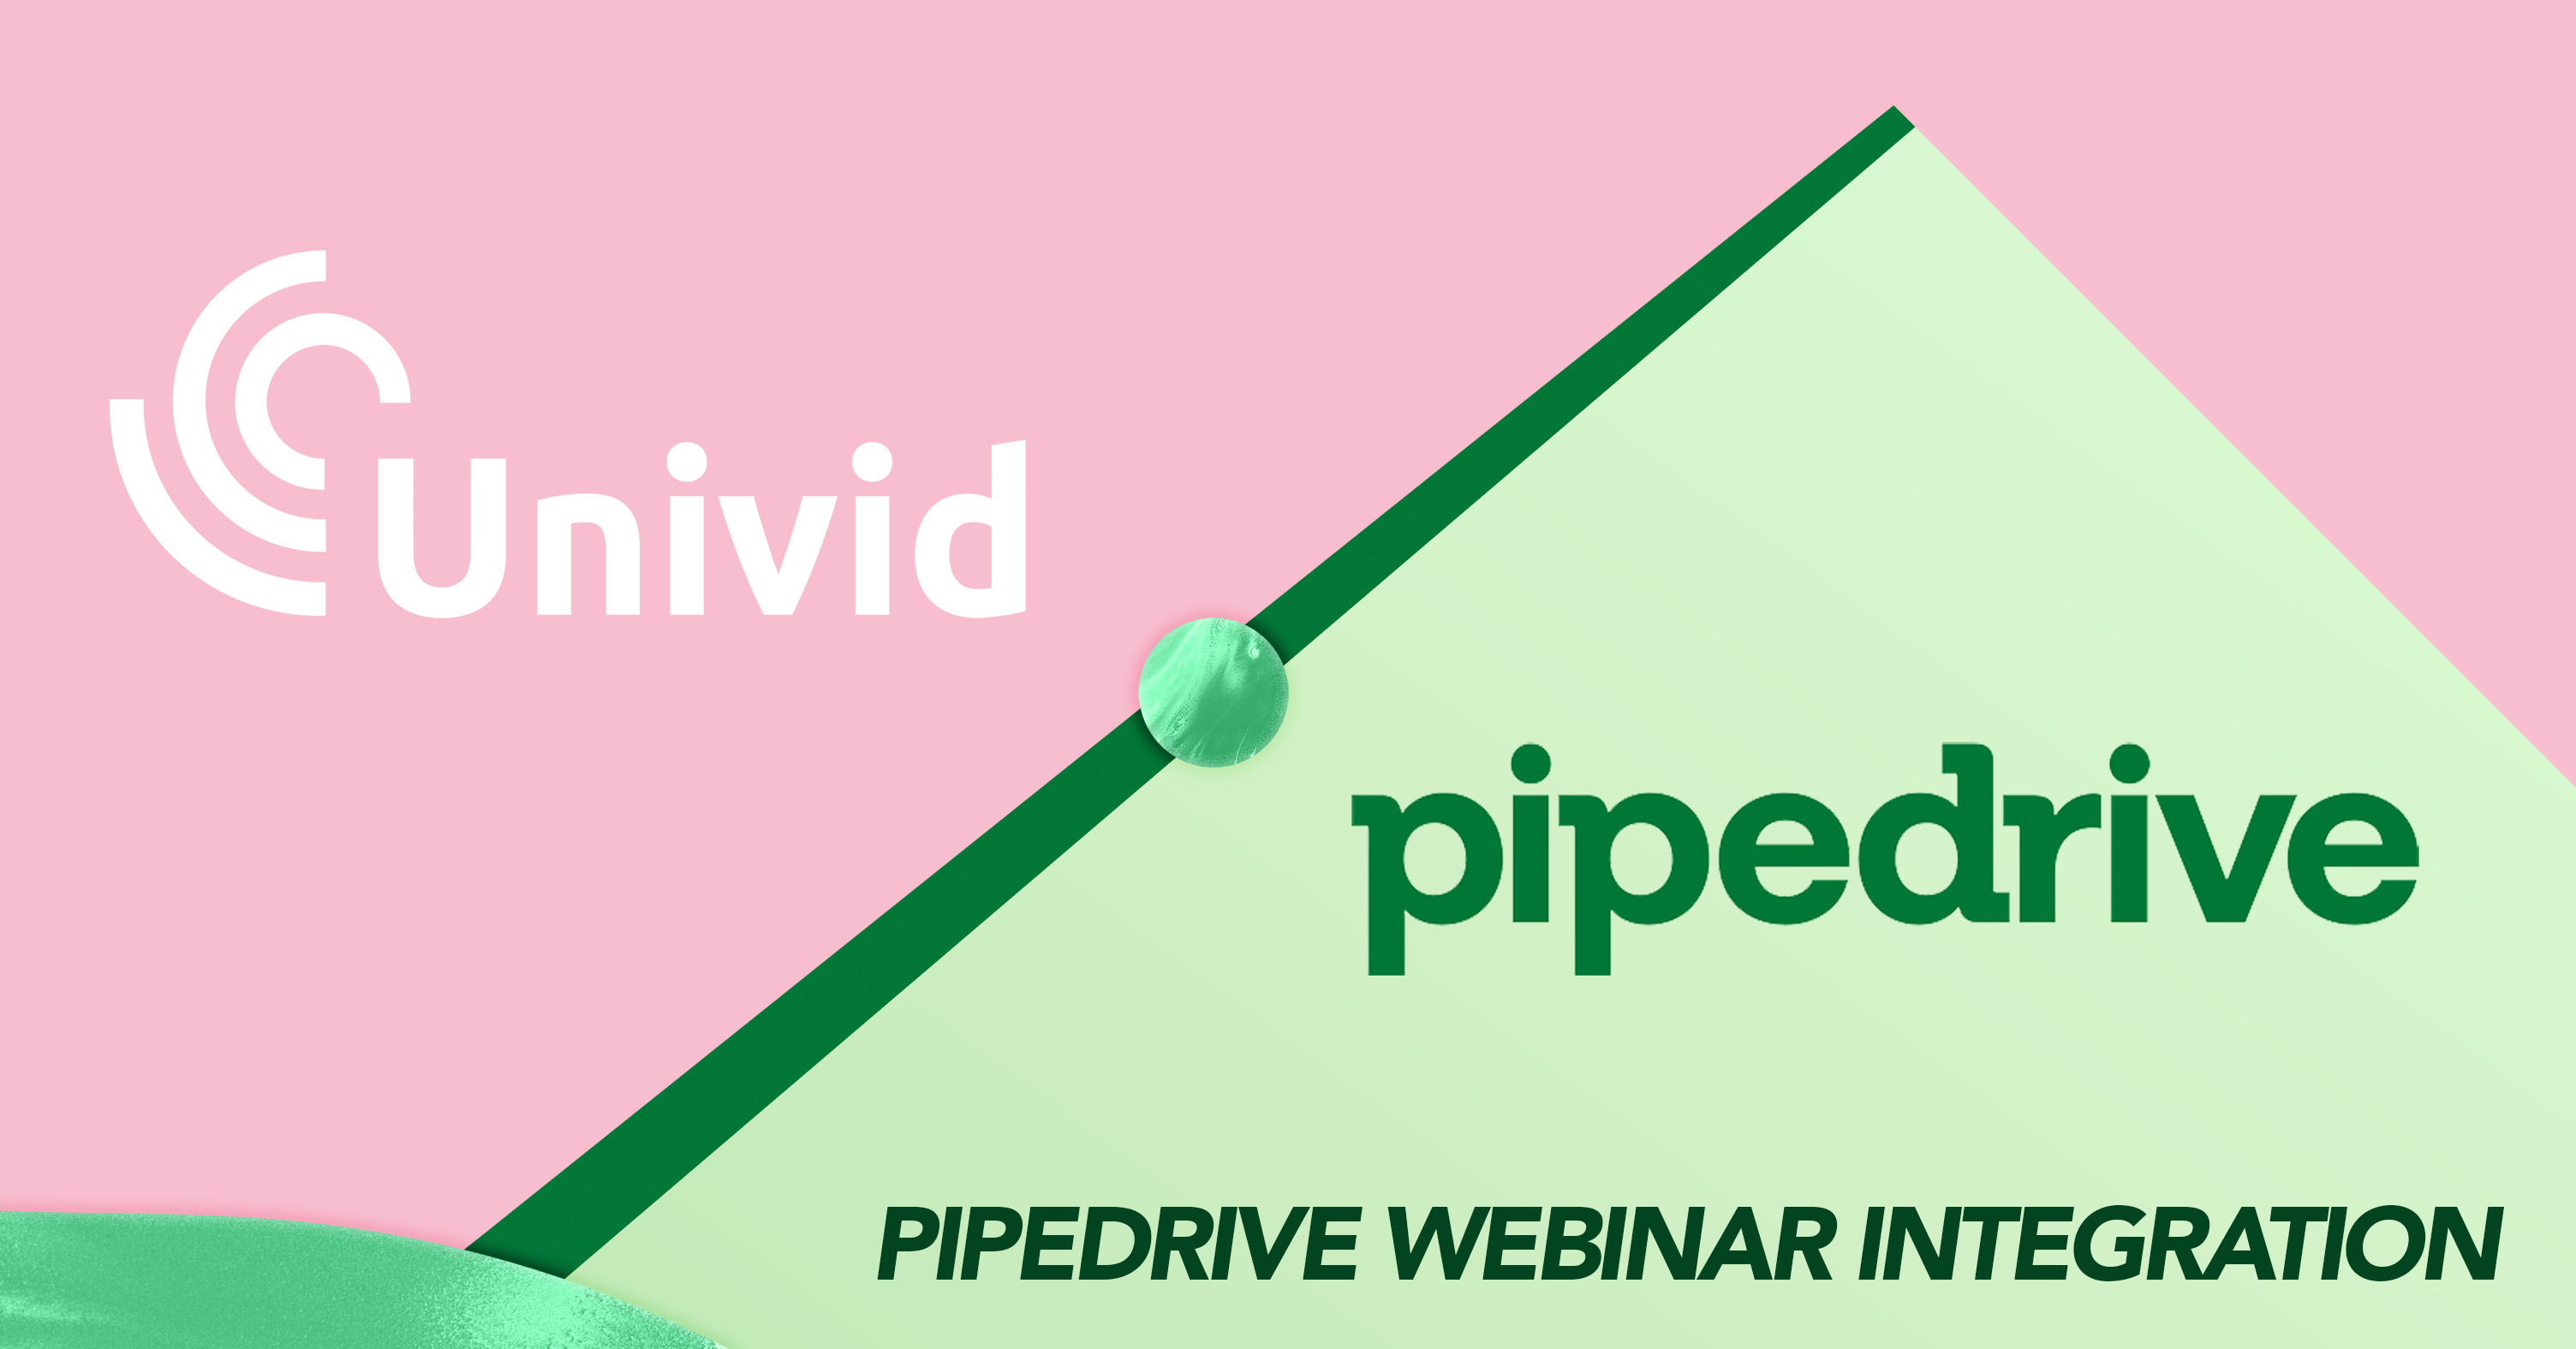 Effortlessly integrate your Univid webinars with Pipedrive CRM - through this Pipedrive webinar integration. A premium integration to streamline your webinar processes, use your own forms, and enjoy engagement insights.